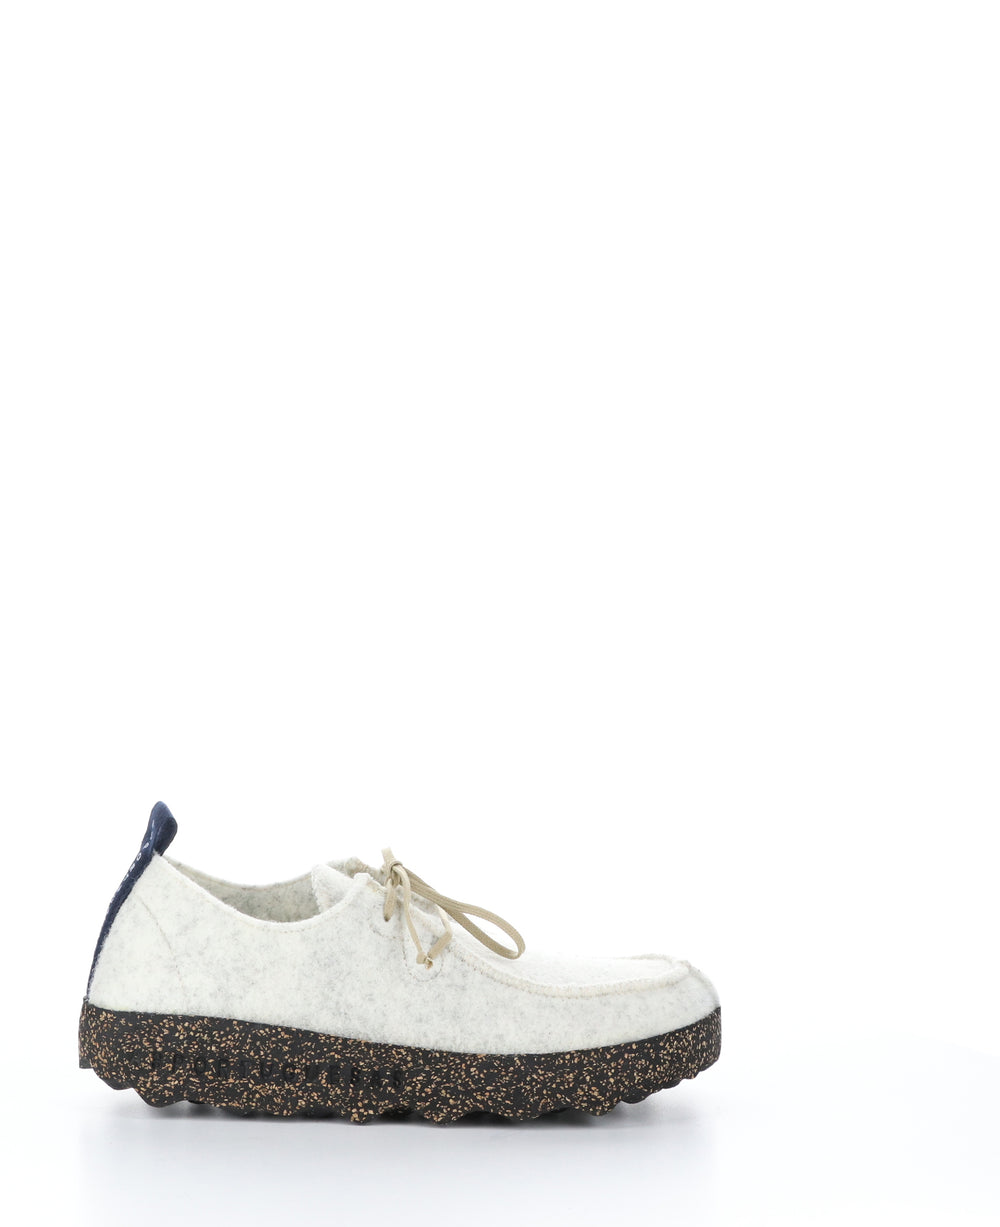 CHAT063ASP Off White Round Toe Shoes